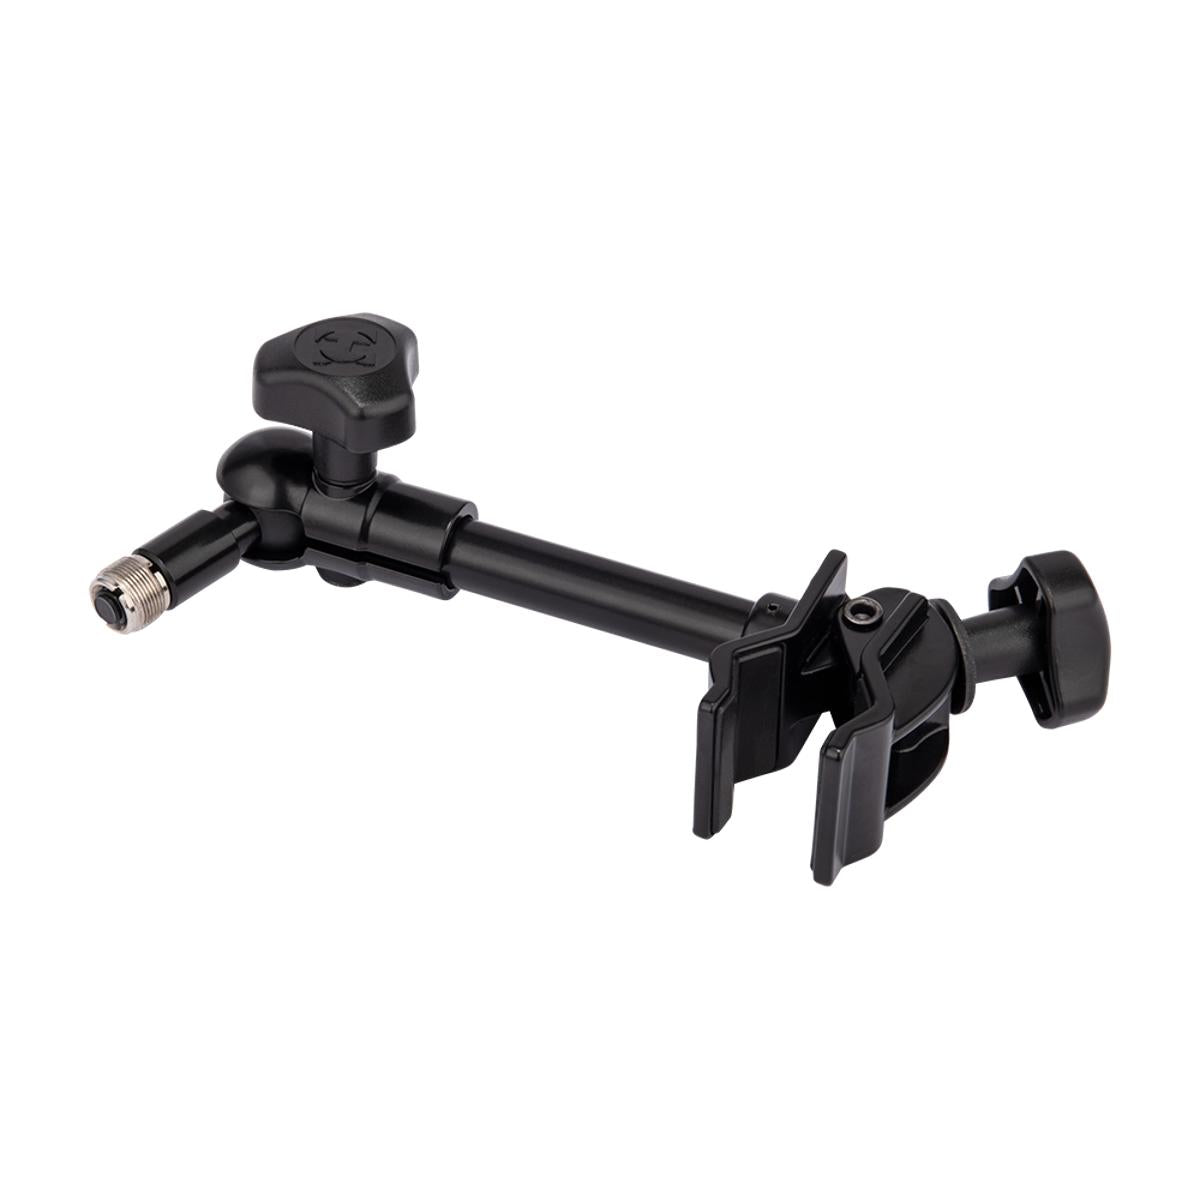 Hercules DG137B Multi-Mount Microphone and Device Holder